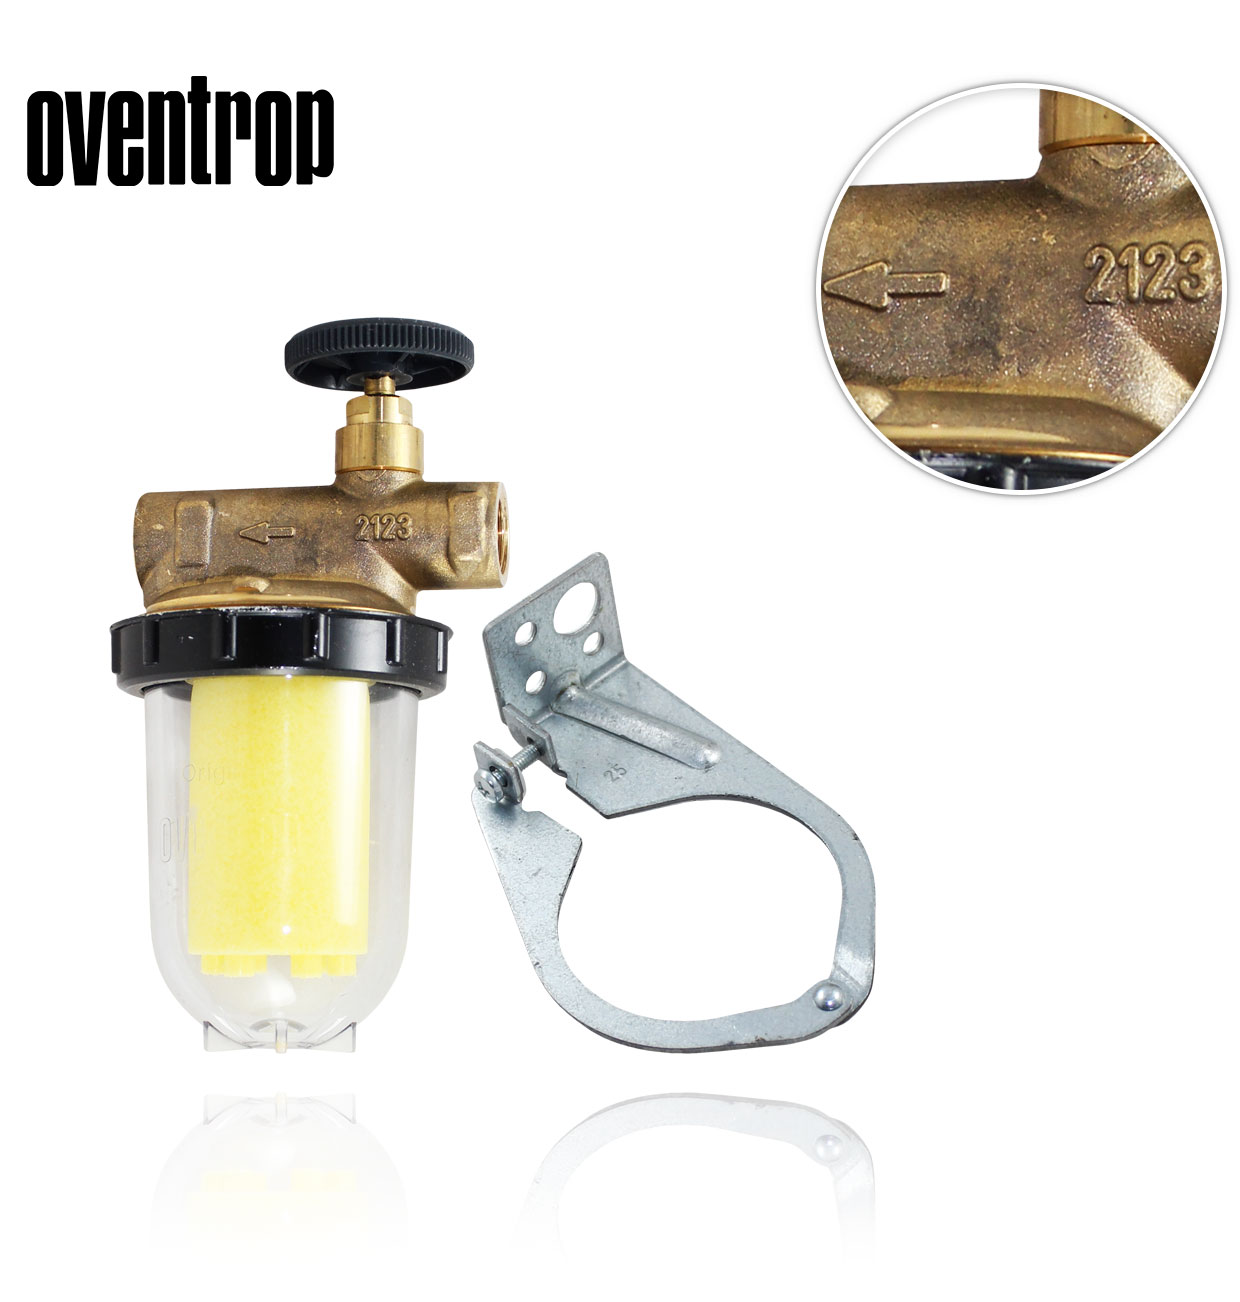 3/8" OVENTROP GAS OIL FILTER with 50-75µm SIKU filter and with flow regulator